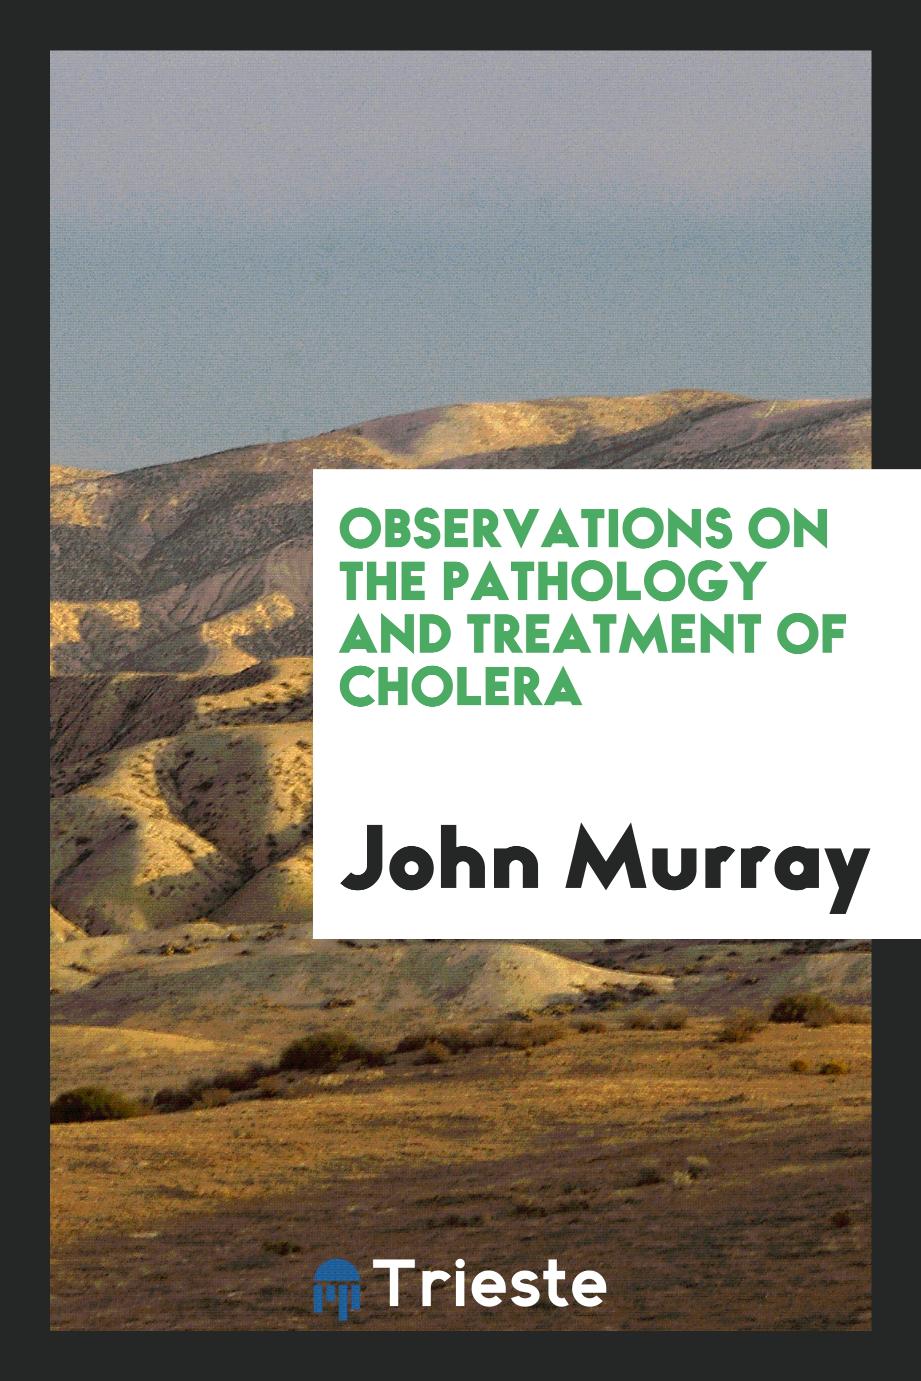 Observations on the pathology and treatment of cholera